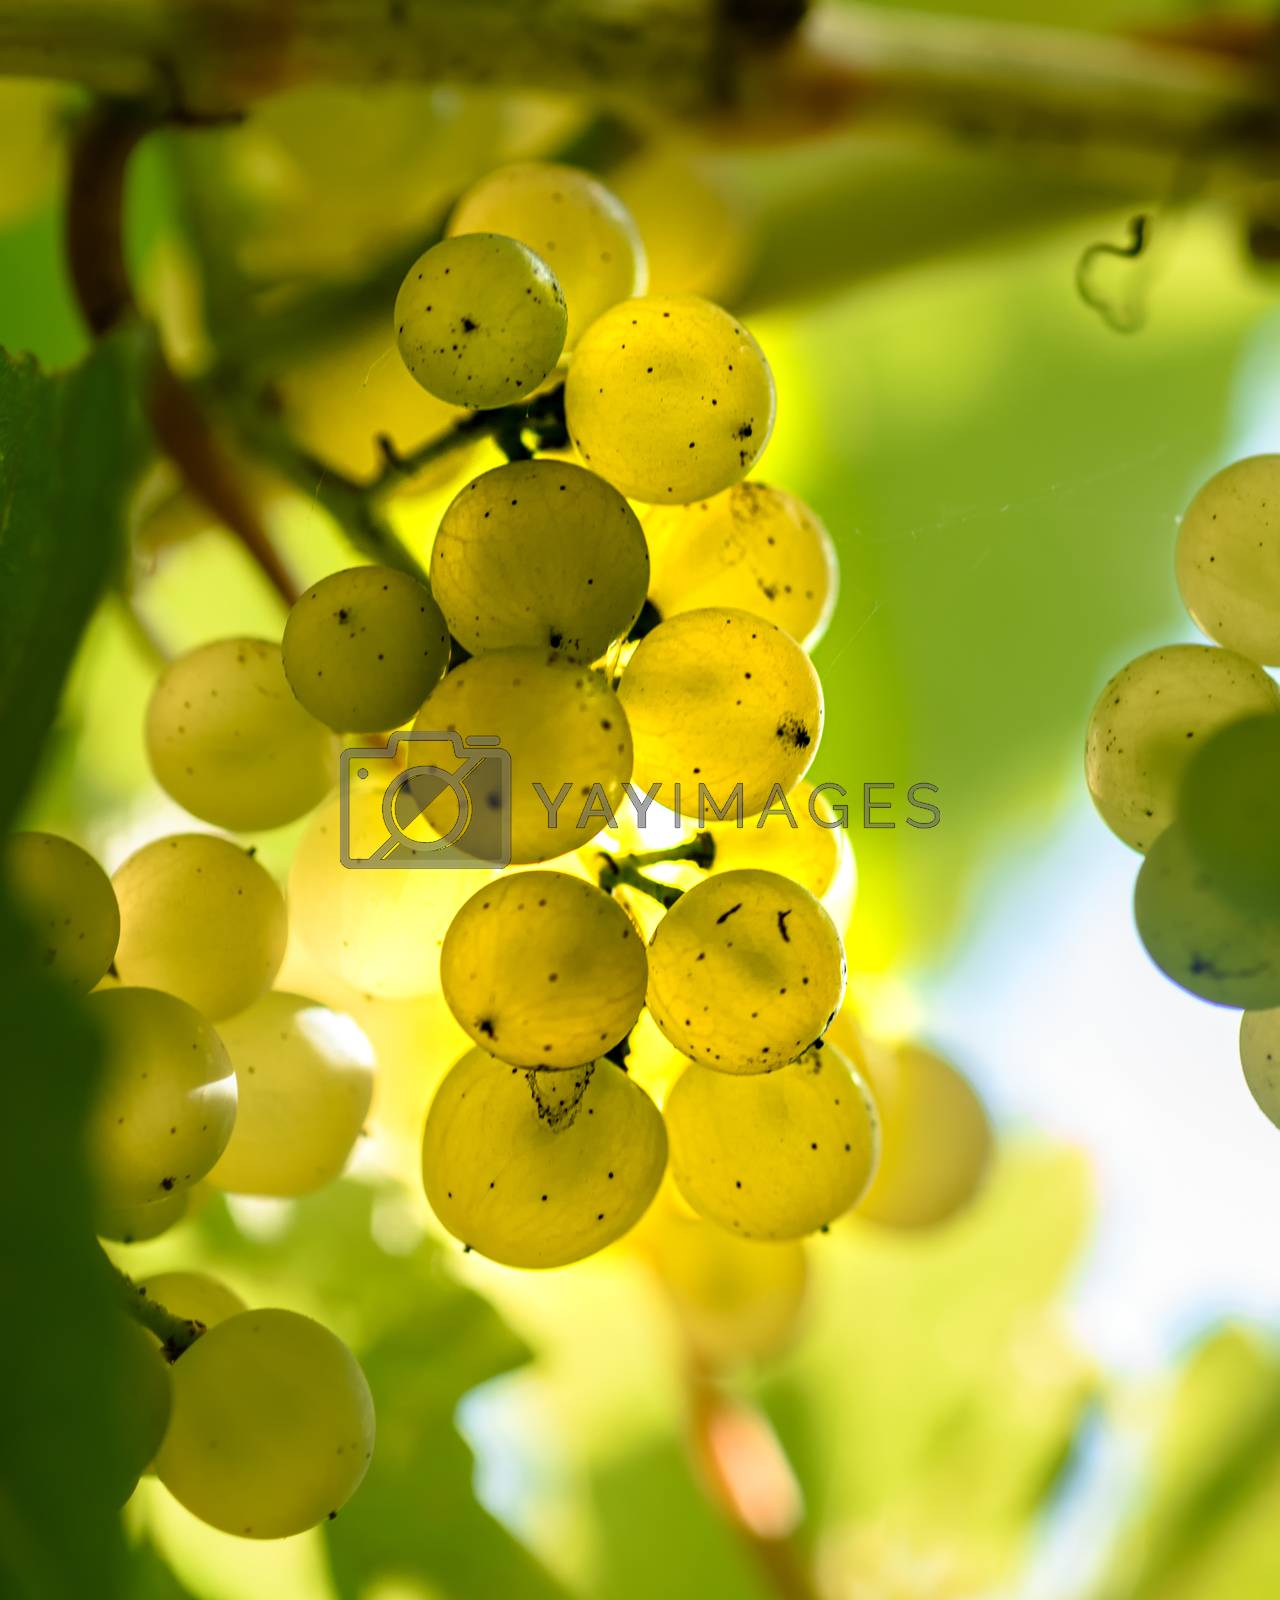 Royalty free image of Clusters of green grapes among the foliage by VladimirZubkov